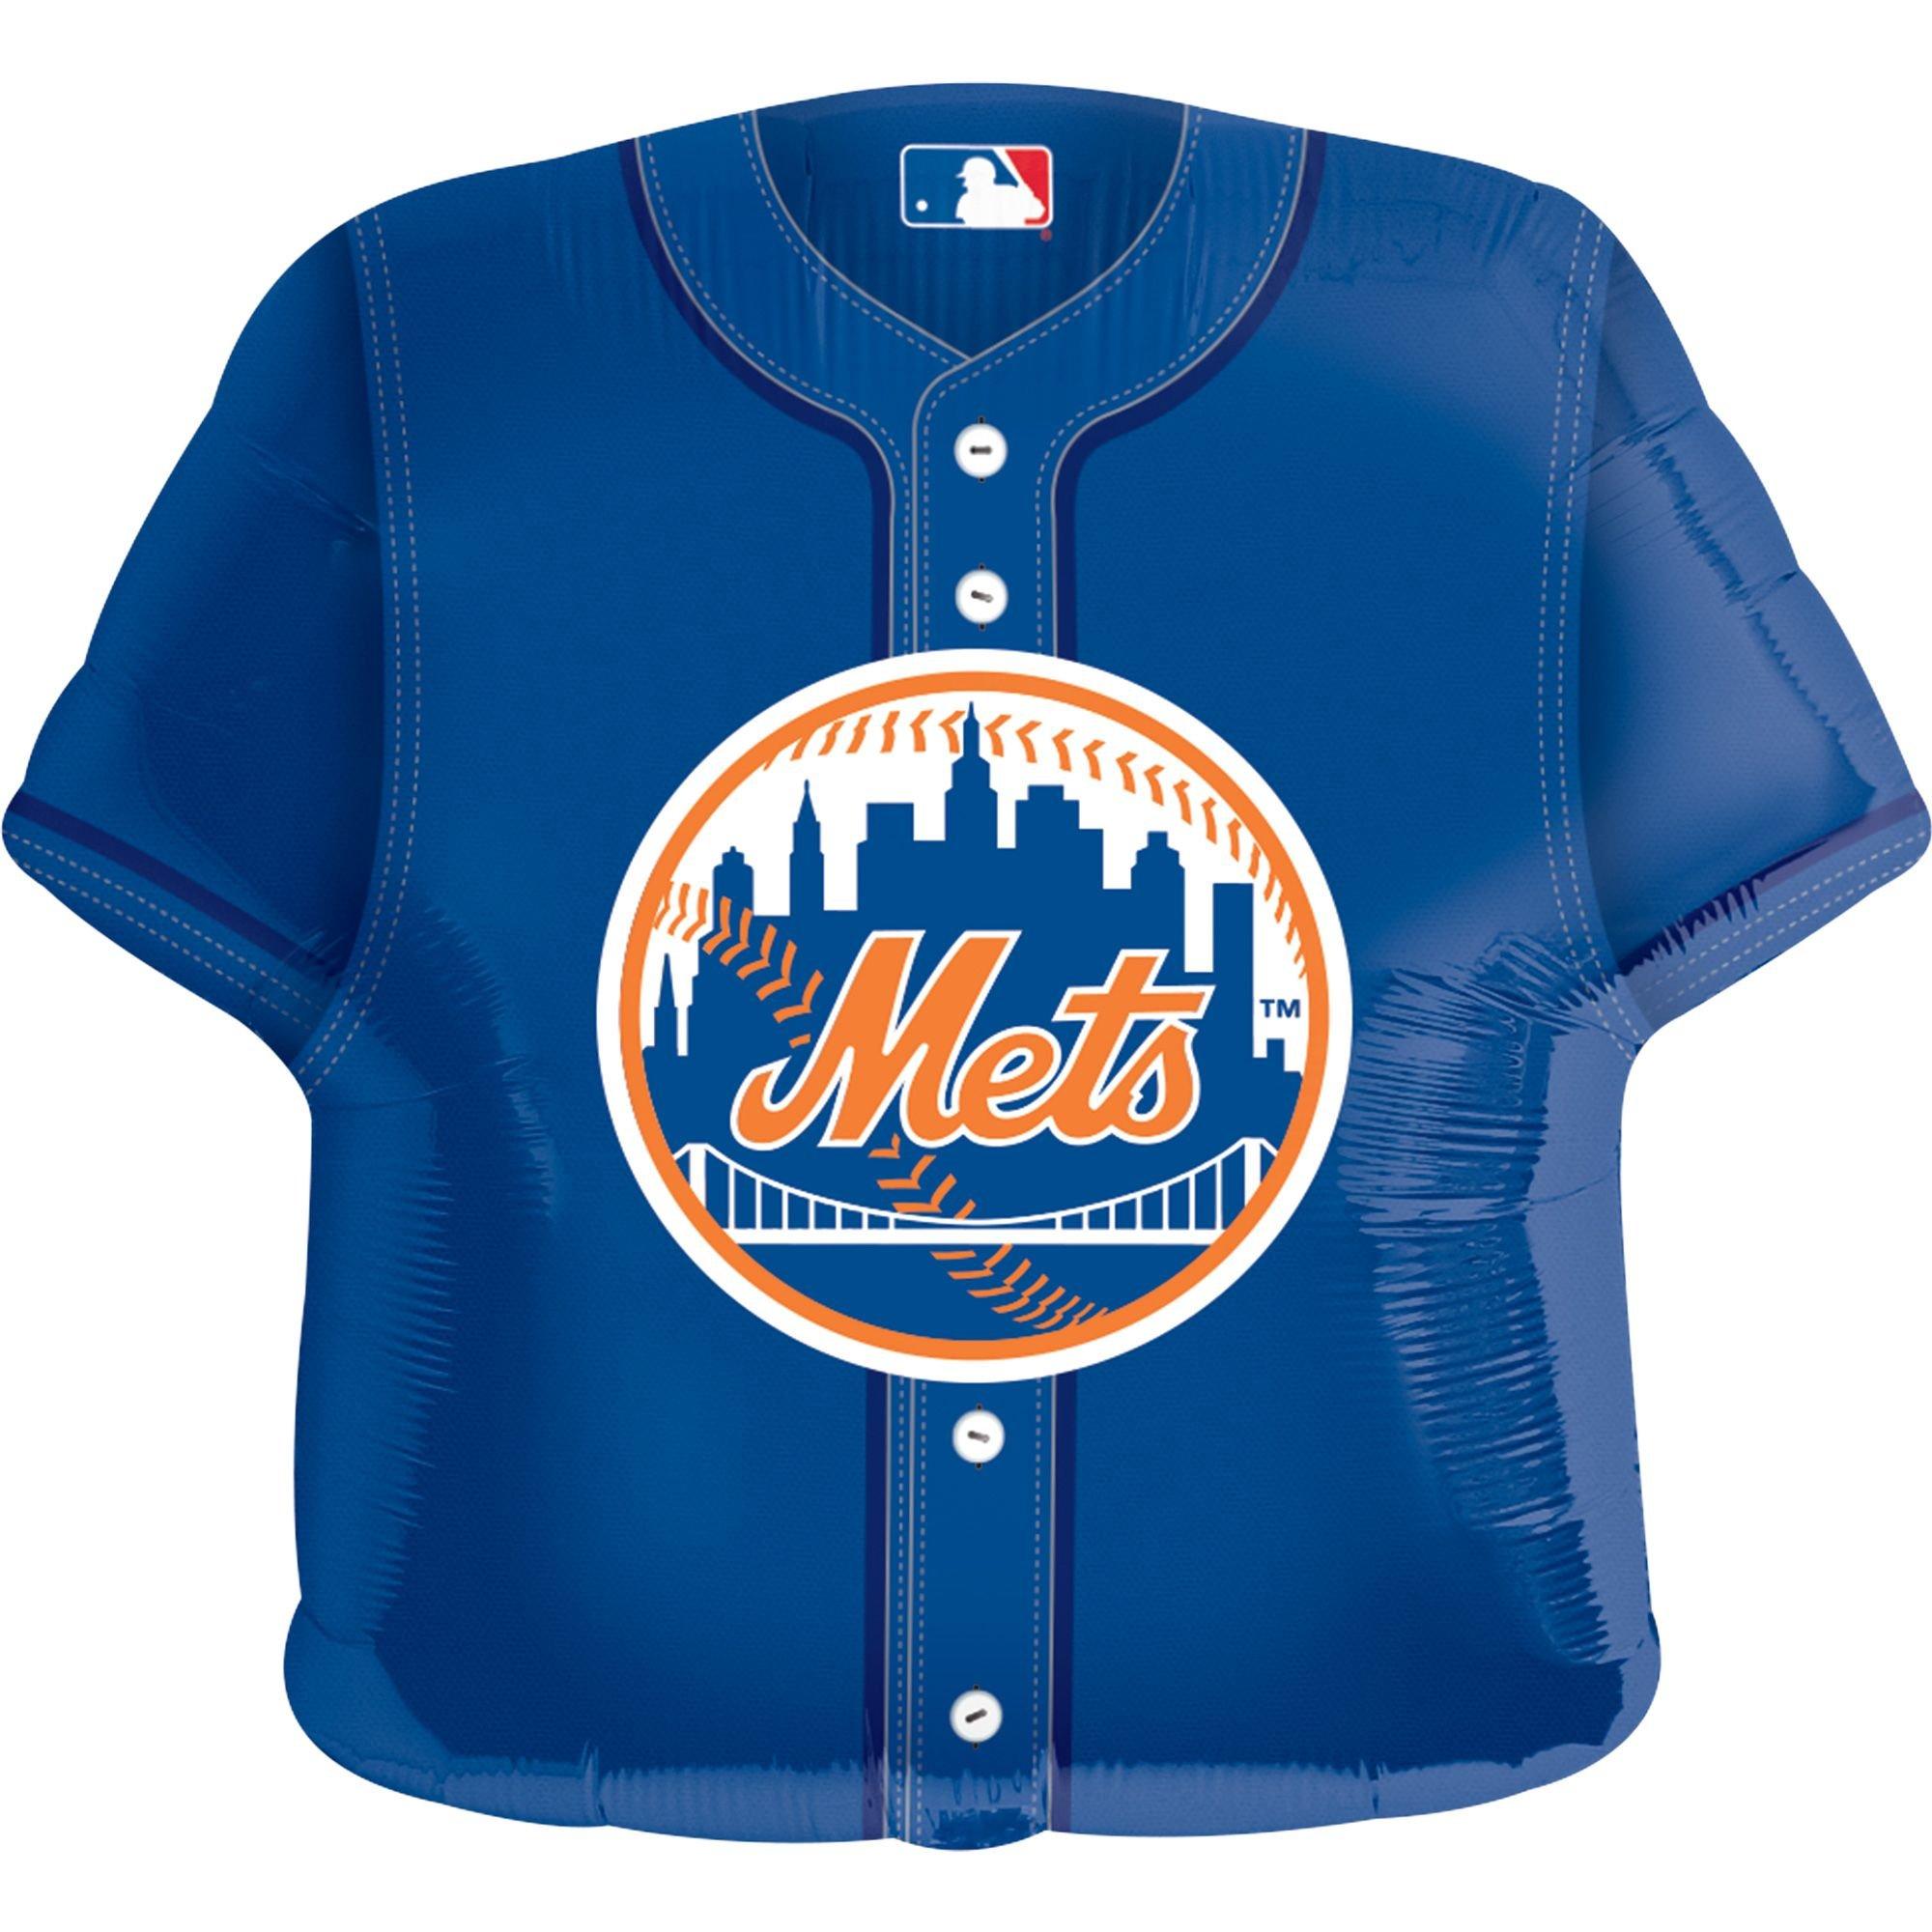 Does this Mets uniform not look terrible? - The Mets Police